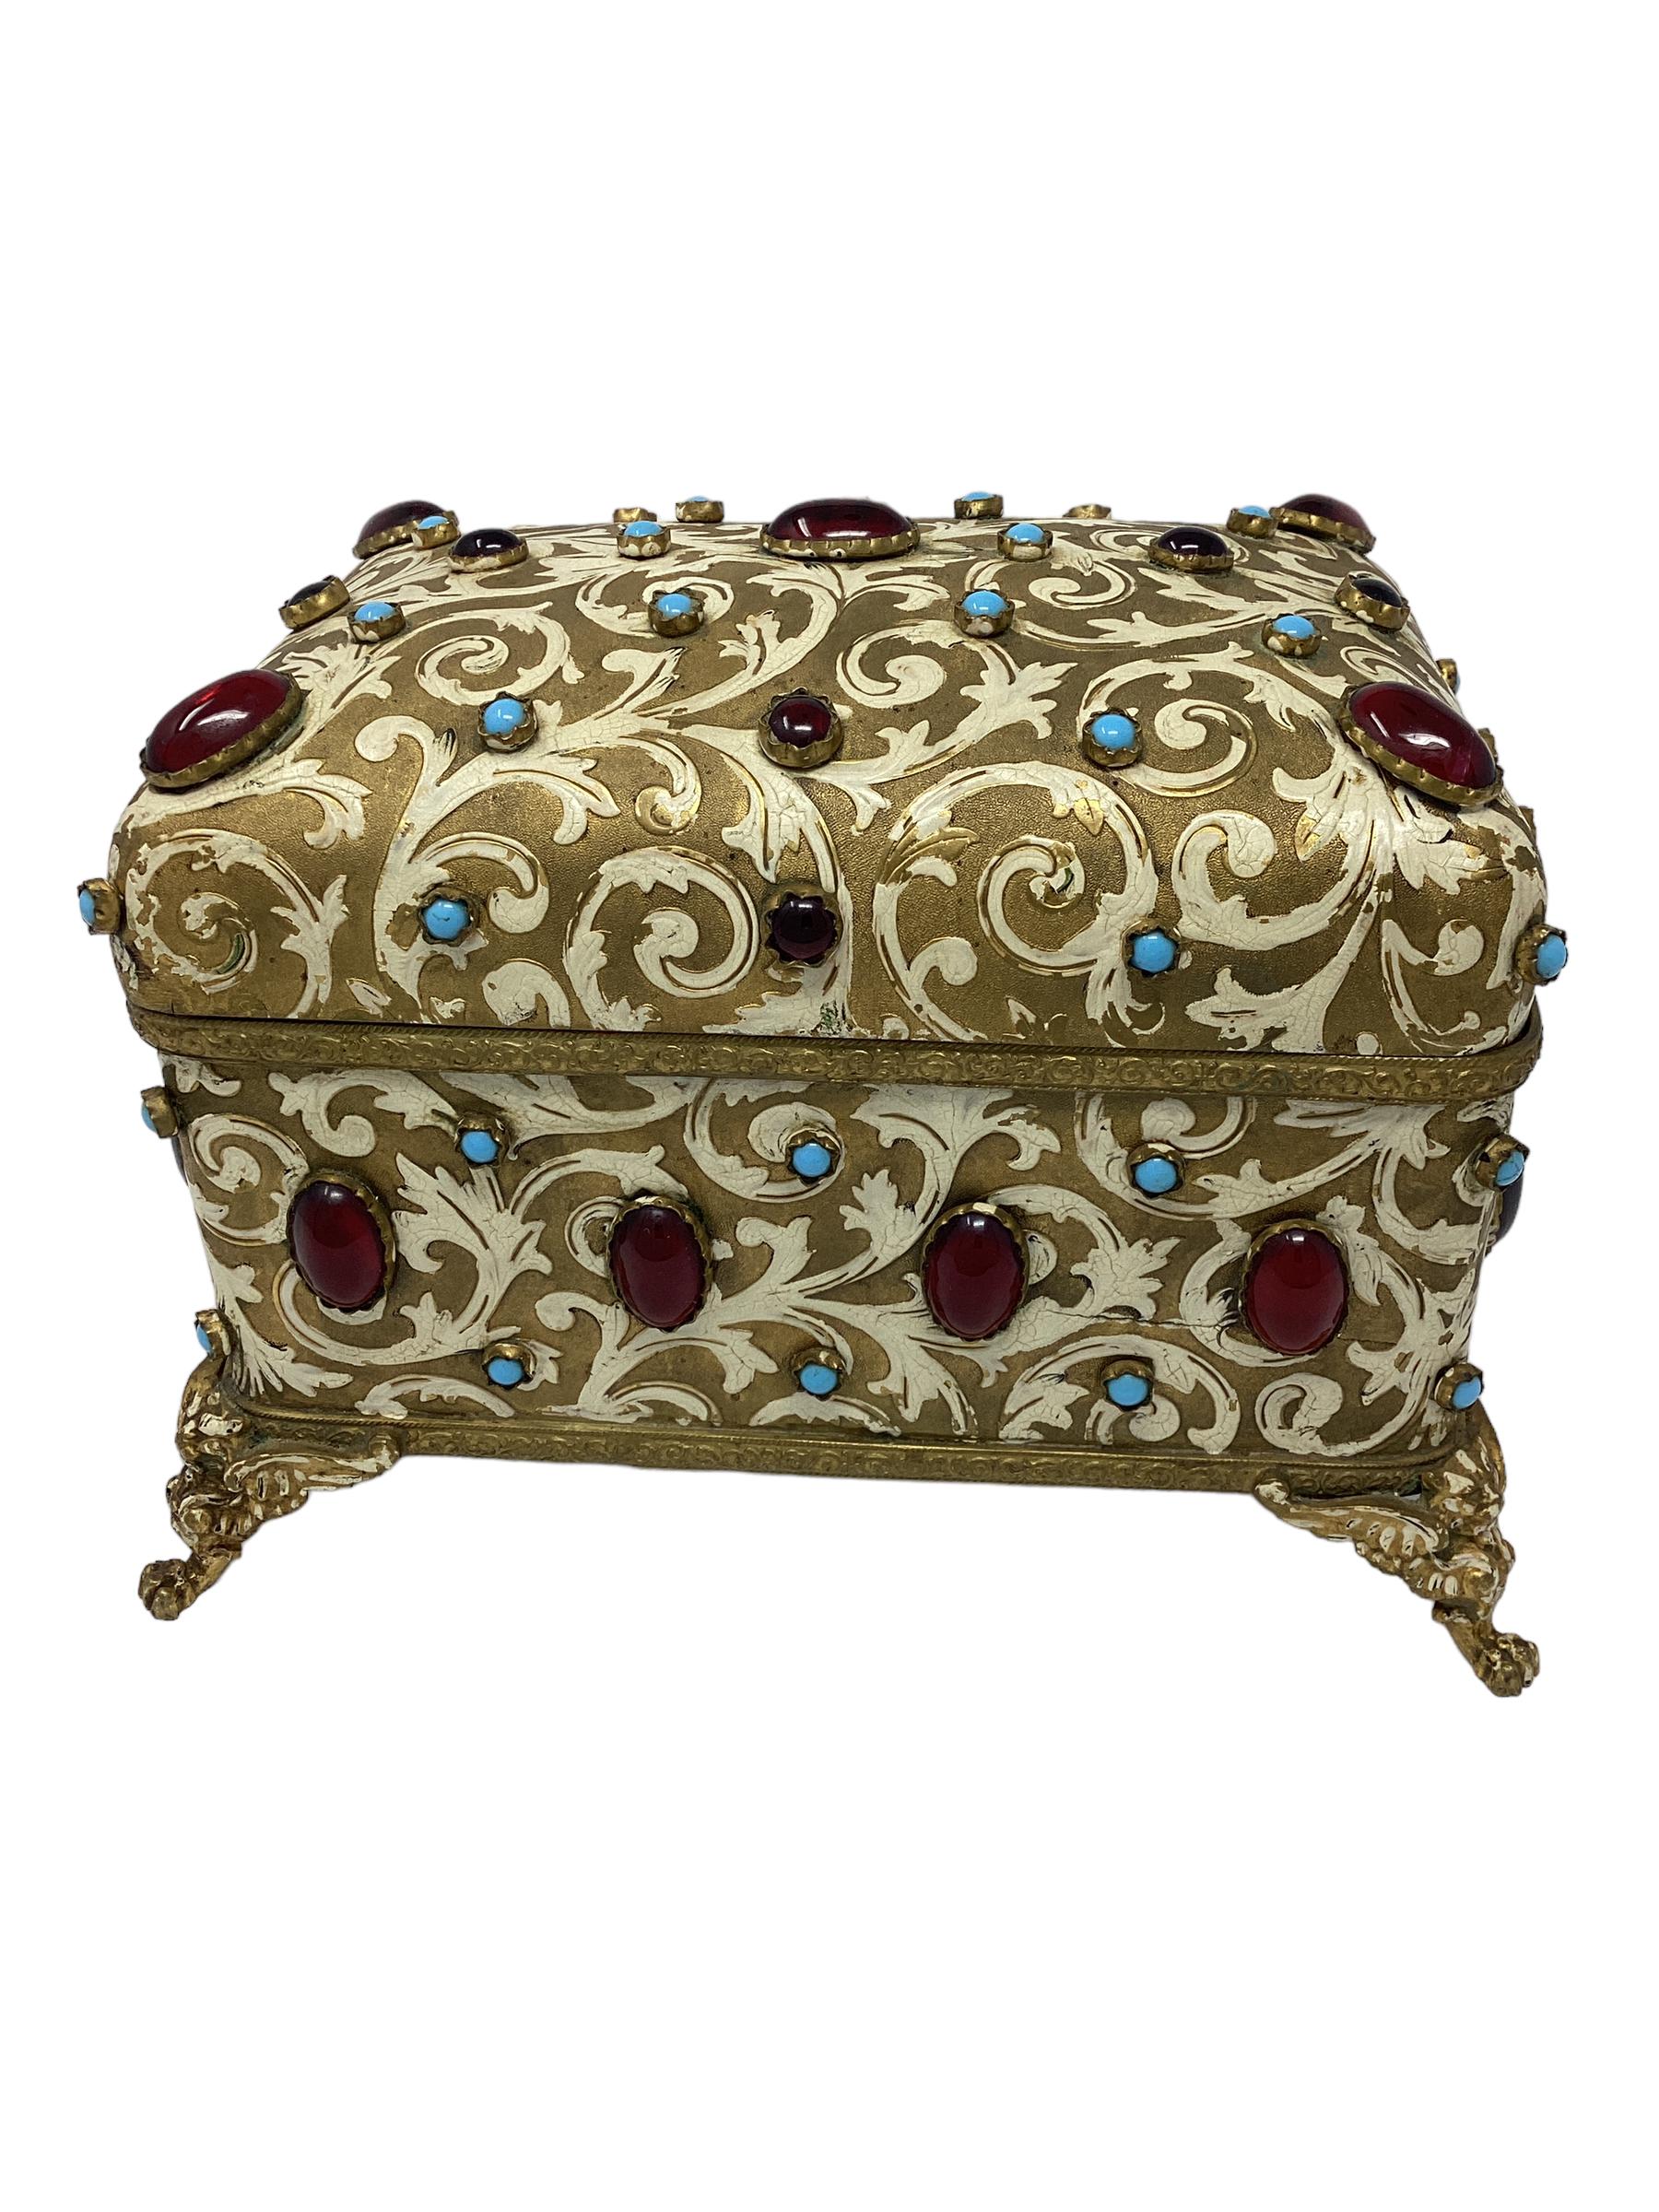 Antique Jewel Encrusted Gilt Bronze Dome Top Box For Sale 3